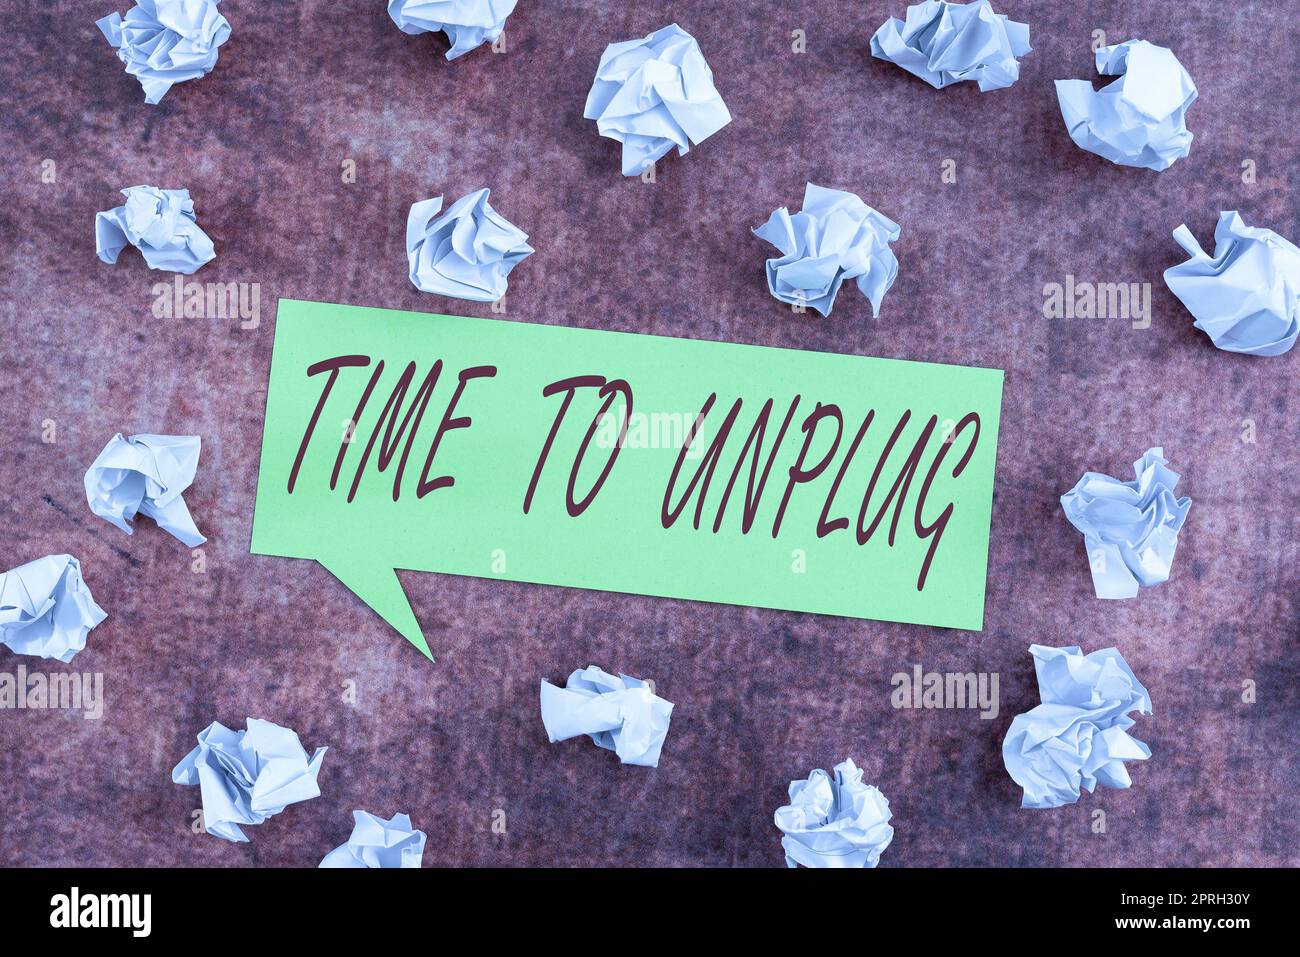 Inspiration showing sign Time To Unplug. Internet Concept Relaxing giving up work disconnecting from everything Blank Explosion Blast Scream Speech Bubble Expressing Opinions. Stock Photo